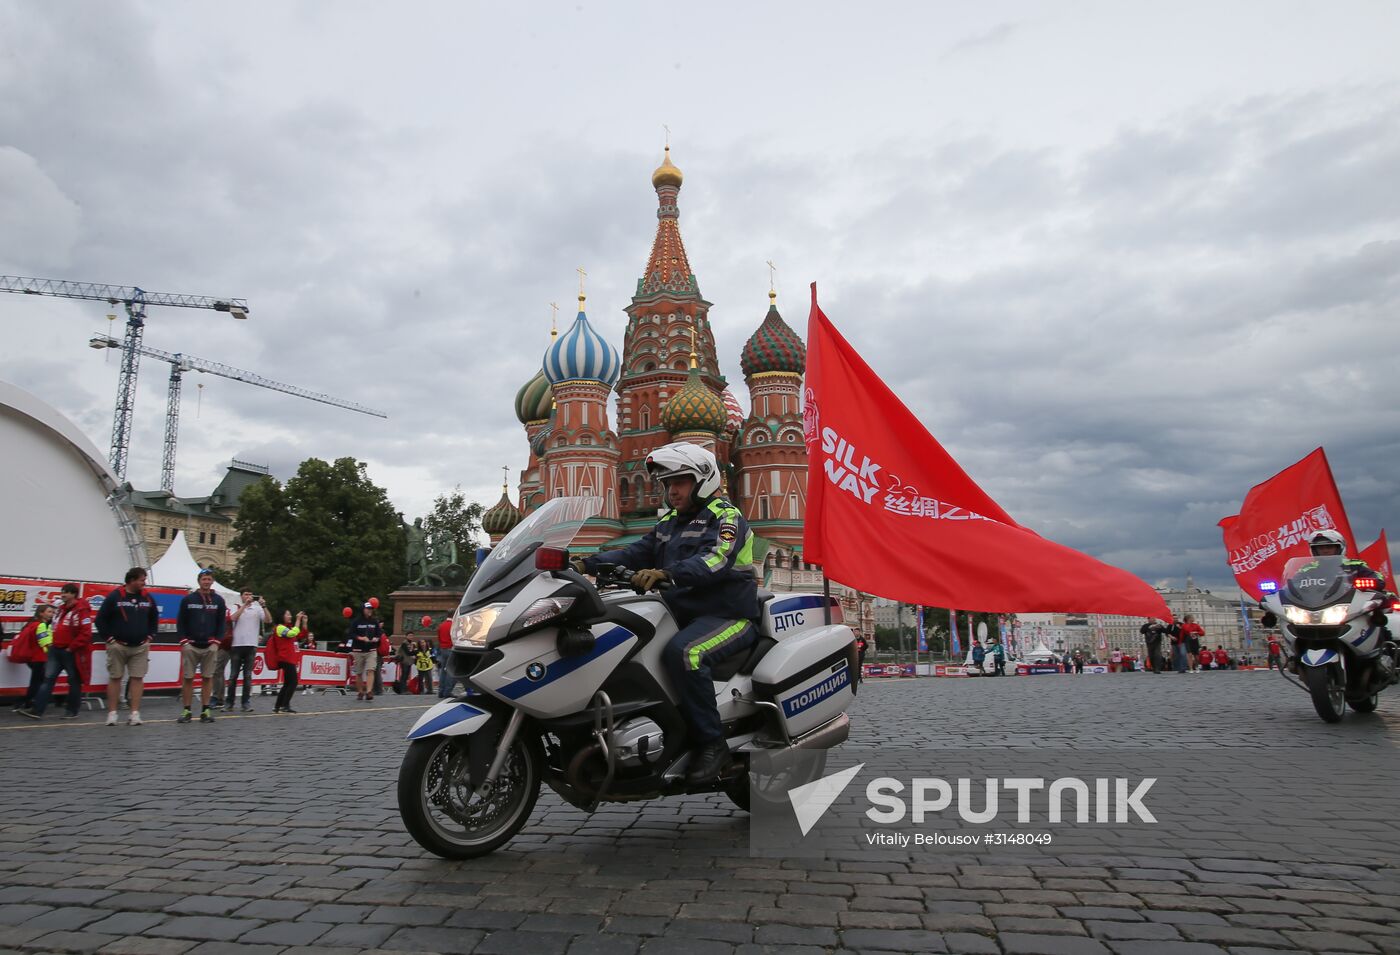 2017 Silk Way Rally kicks off in Moscow